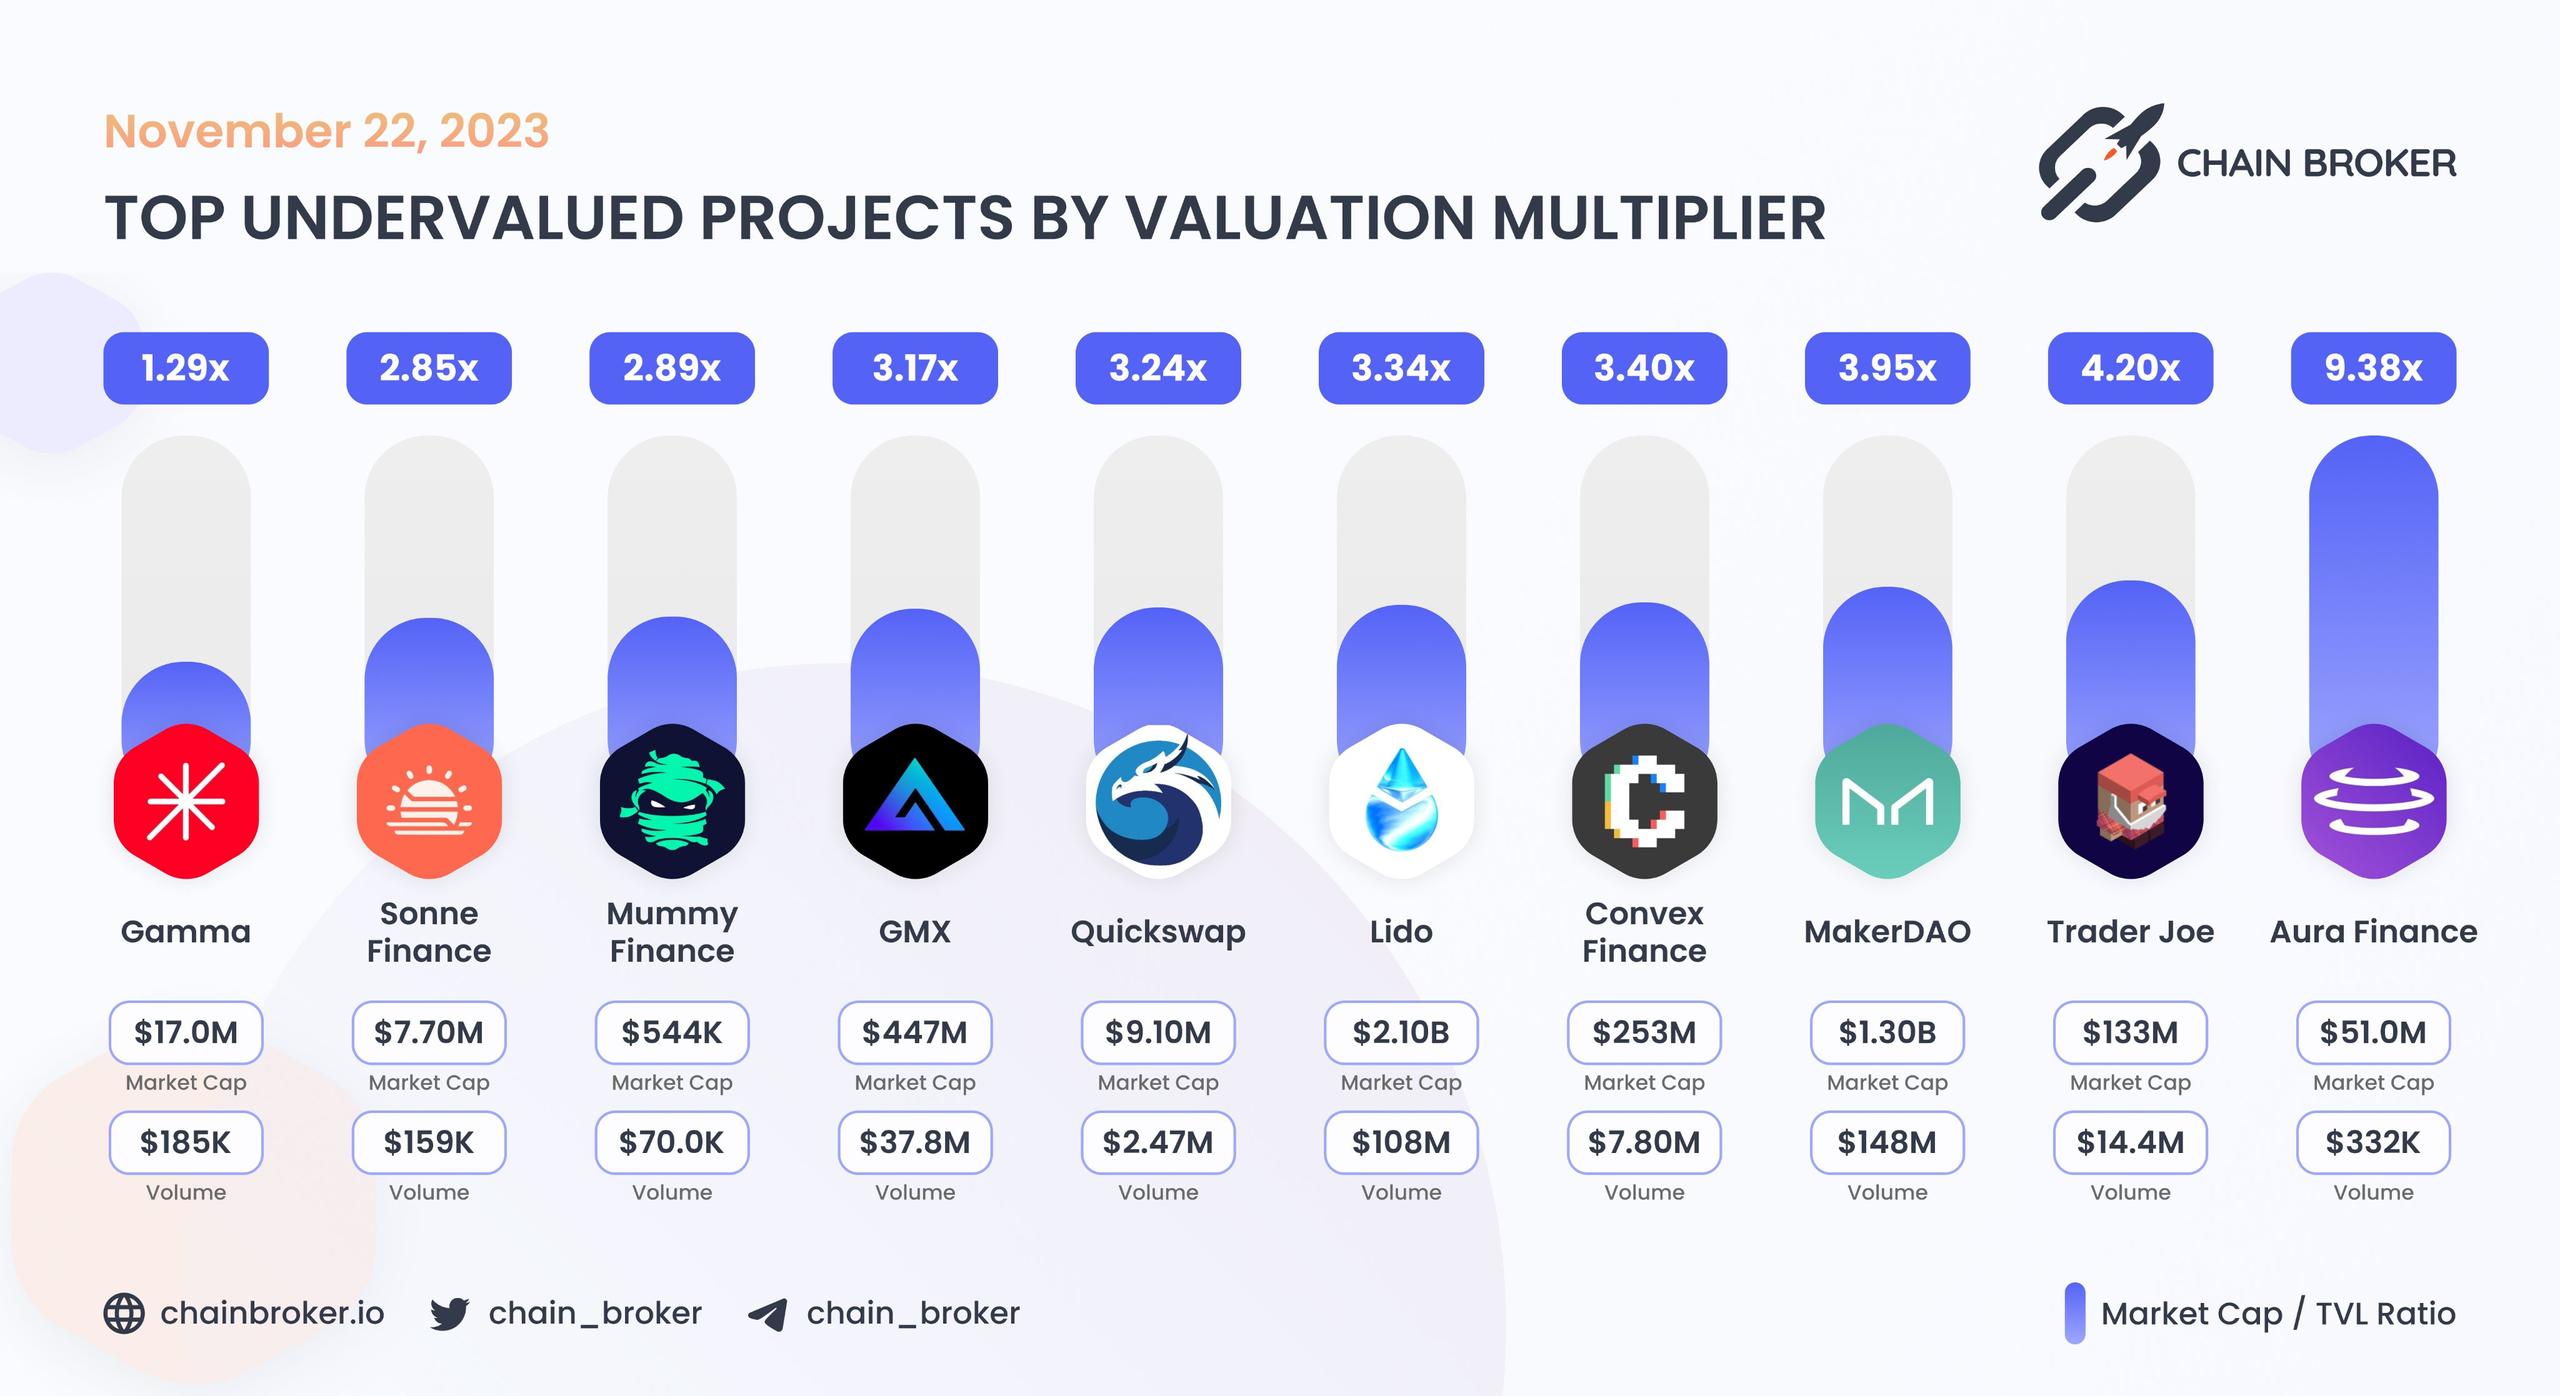 Top undervalued projects by valuation multiplier